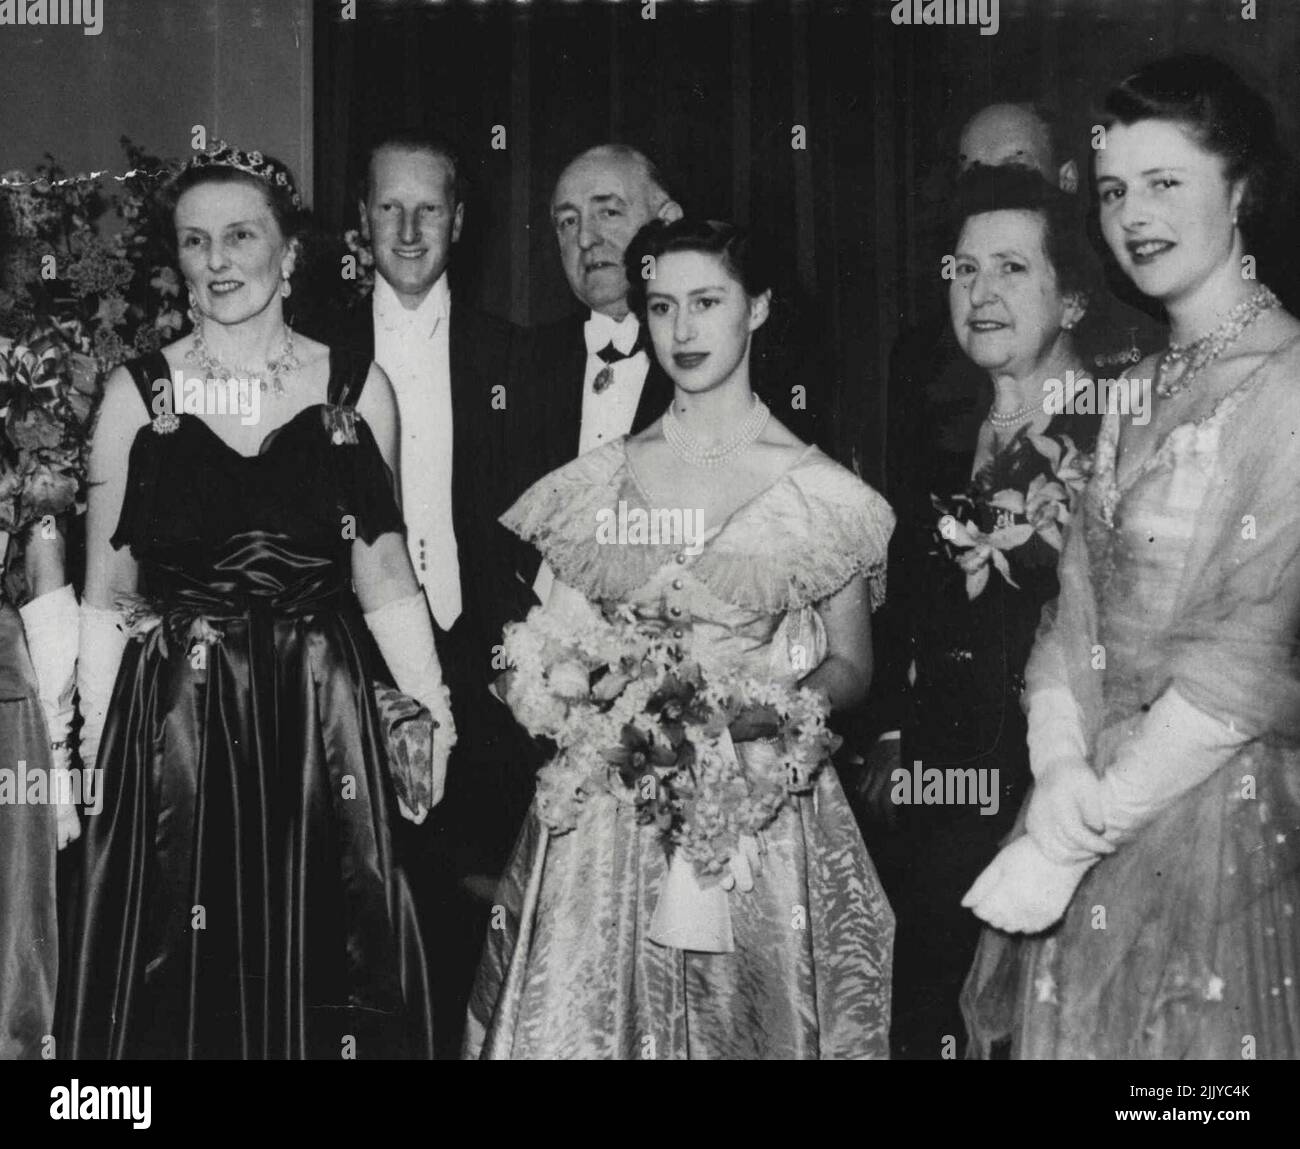 the Ball held in Glasgow in aid of the Scottish Association of Girls Clubs. Left to Right: Miss Sheila Carlon, the Duchess of Buccleuch, the Earl of Dalkeith. 25 - year - old only son of the Duke of Buccleuch, Sir Hector McNeill , Lord Provost of Glasgow, Princess Margaret, Lady McNeill, and Lady Caroline Scott 21 - year old younger daughter of the Duke and Duchess of Buccleuch, one of Princess Margaret's great friends. Week-End in Scotland Princess Margaret is Week-Ending in Scotland. She is staying with the Duke and Duchess of Buccleuch at Drumlanrig Castle, Dumfriesshire. February 20, 1949. Stock Photo